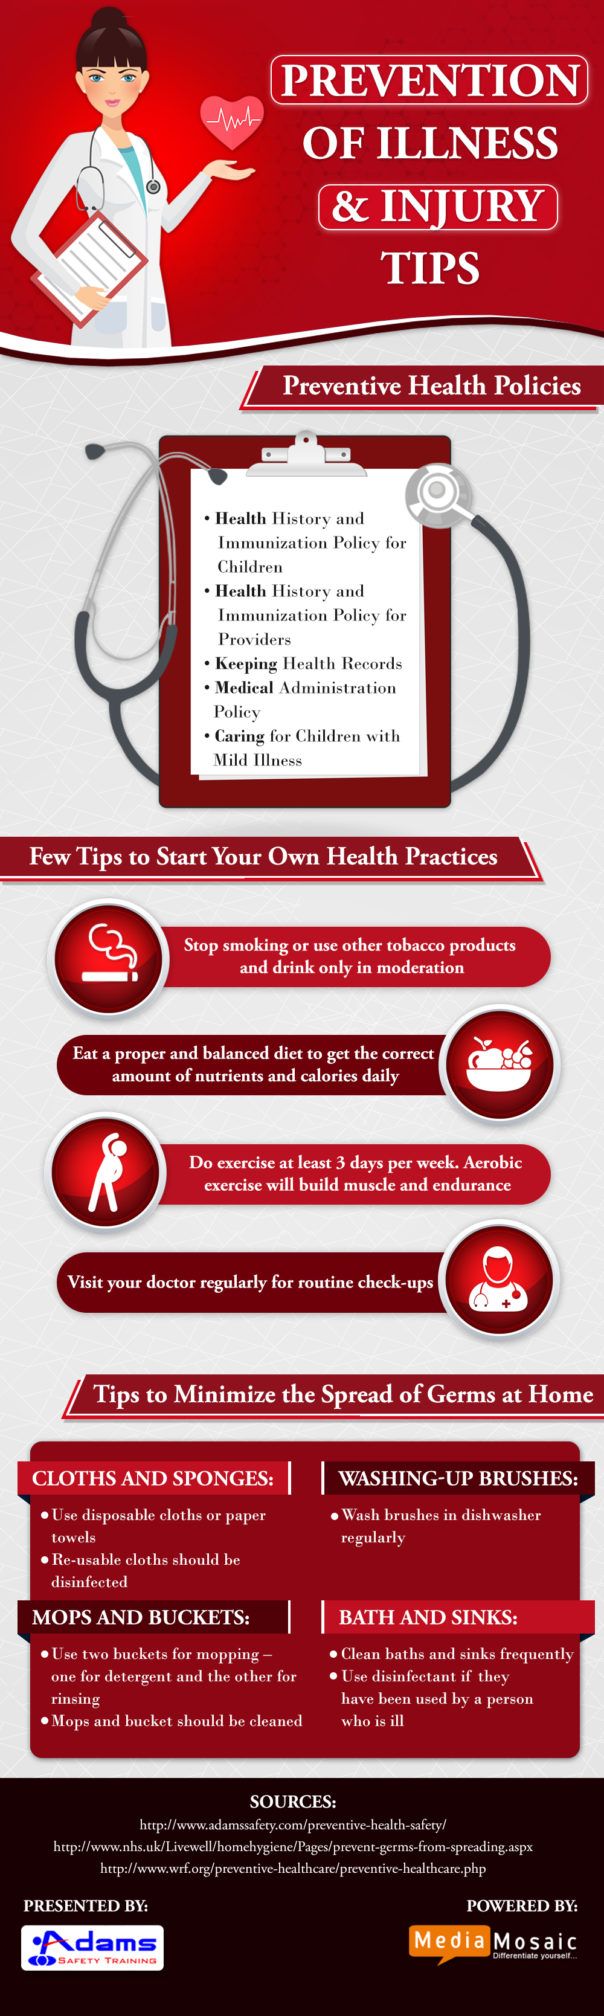 Prevention of Illness and Injury Tips - Infographic